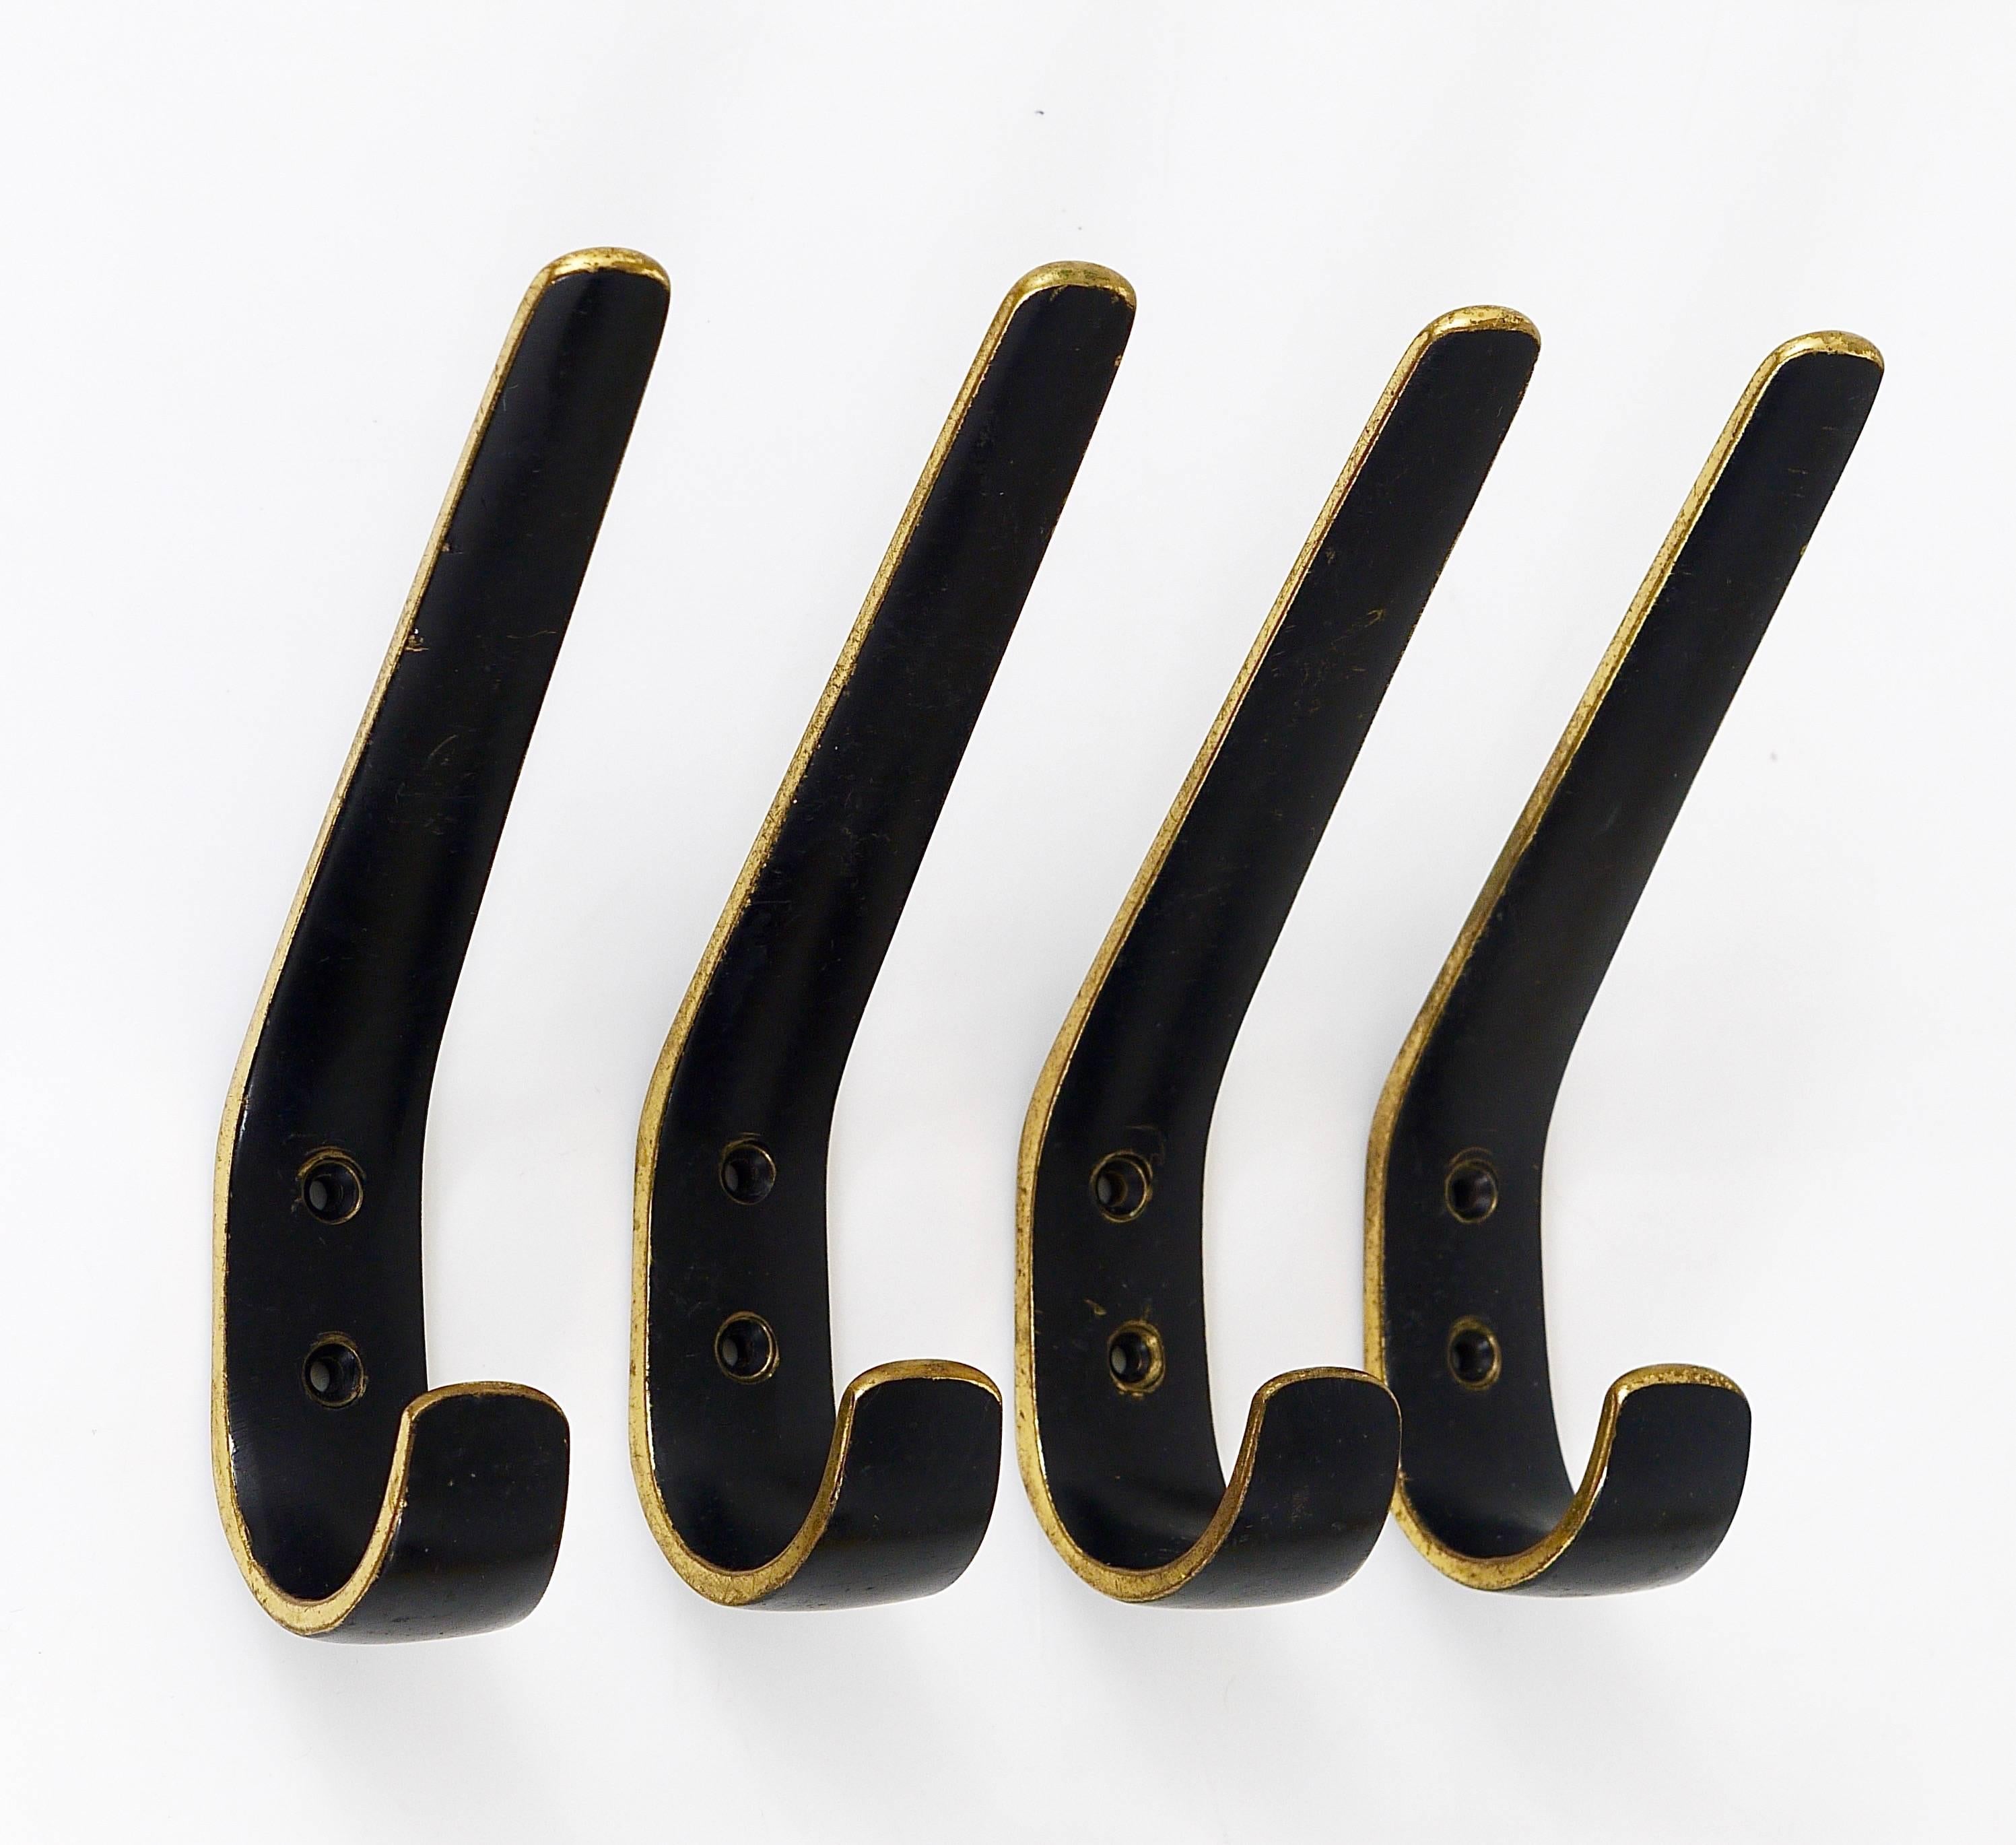 A set of four beautiful Austrian modernist wall hooks, made of black-finished brass, executed in the 1950s by Hertha Baller, Austria. In good condition, with nice patina. The price is for the set of four hooks.